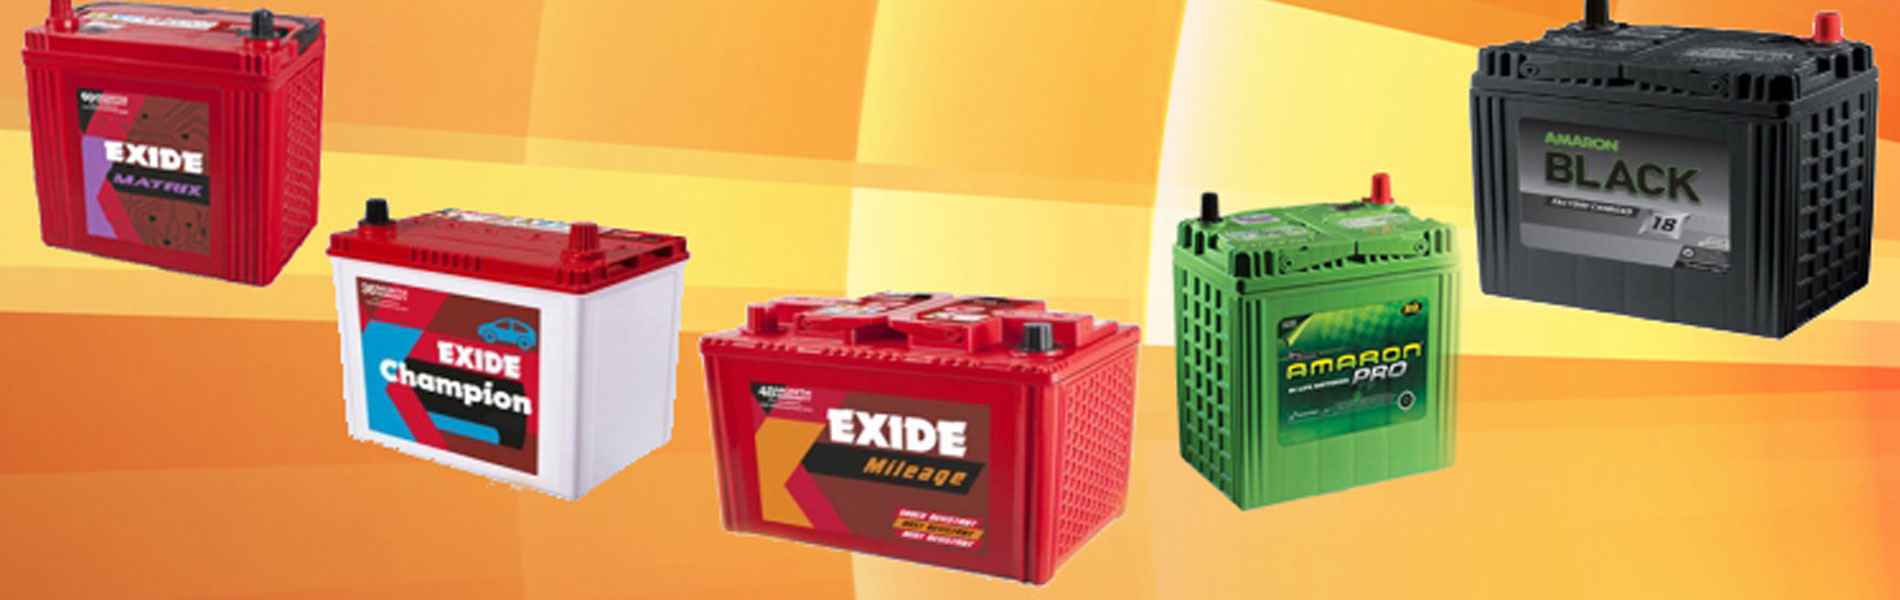 exide battery distributor contact number